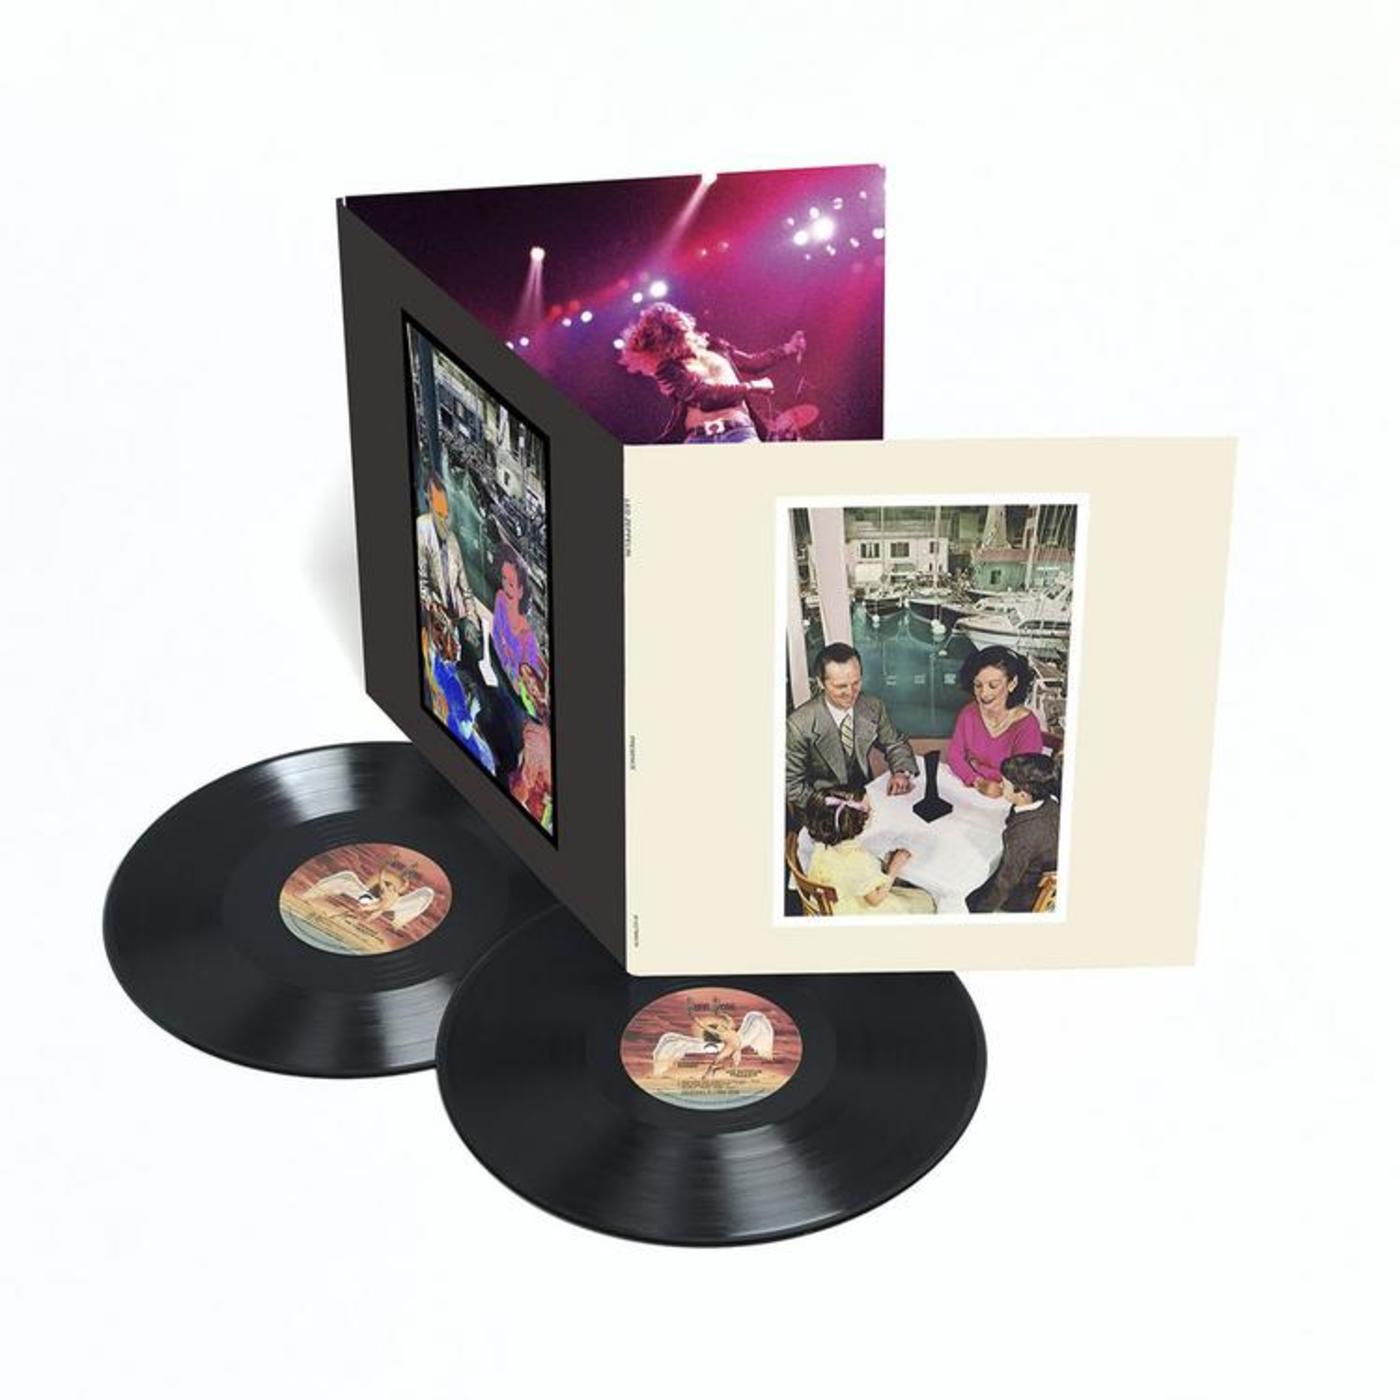 Presence - Deluxe Edition Remastered Vinyl